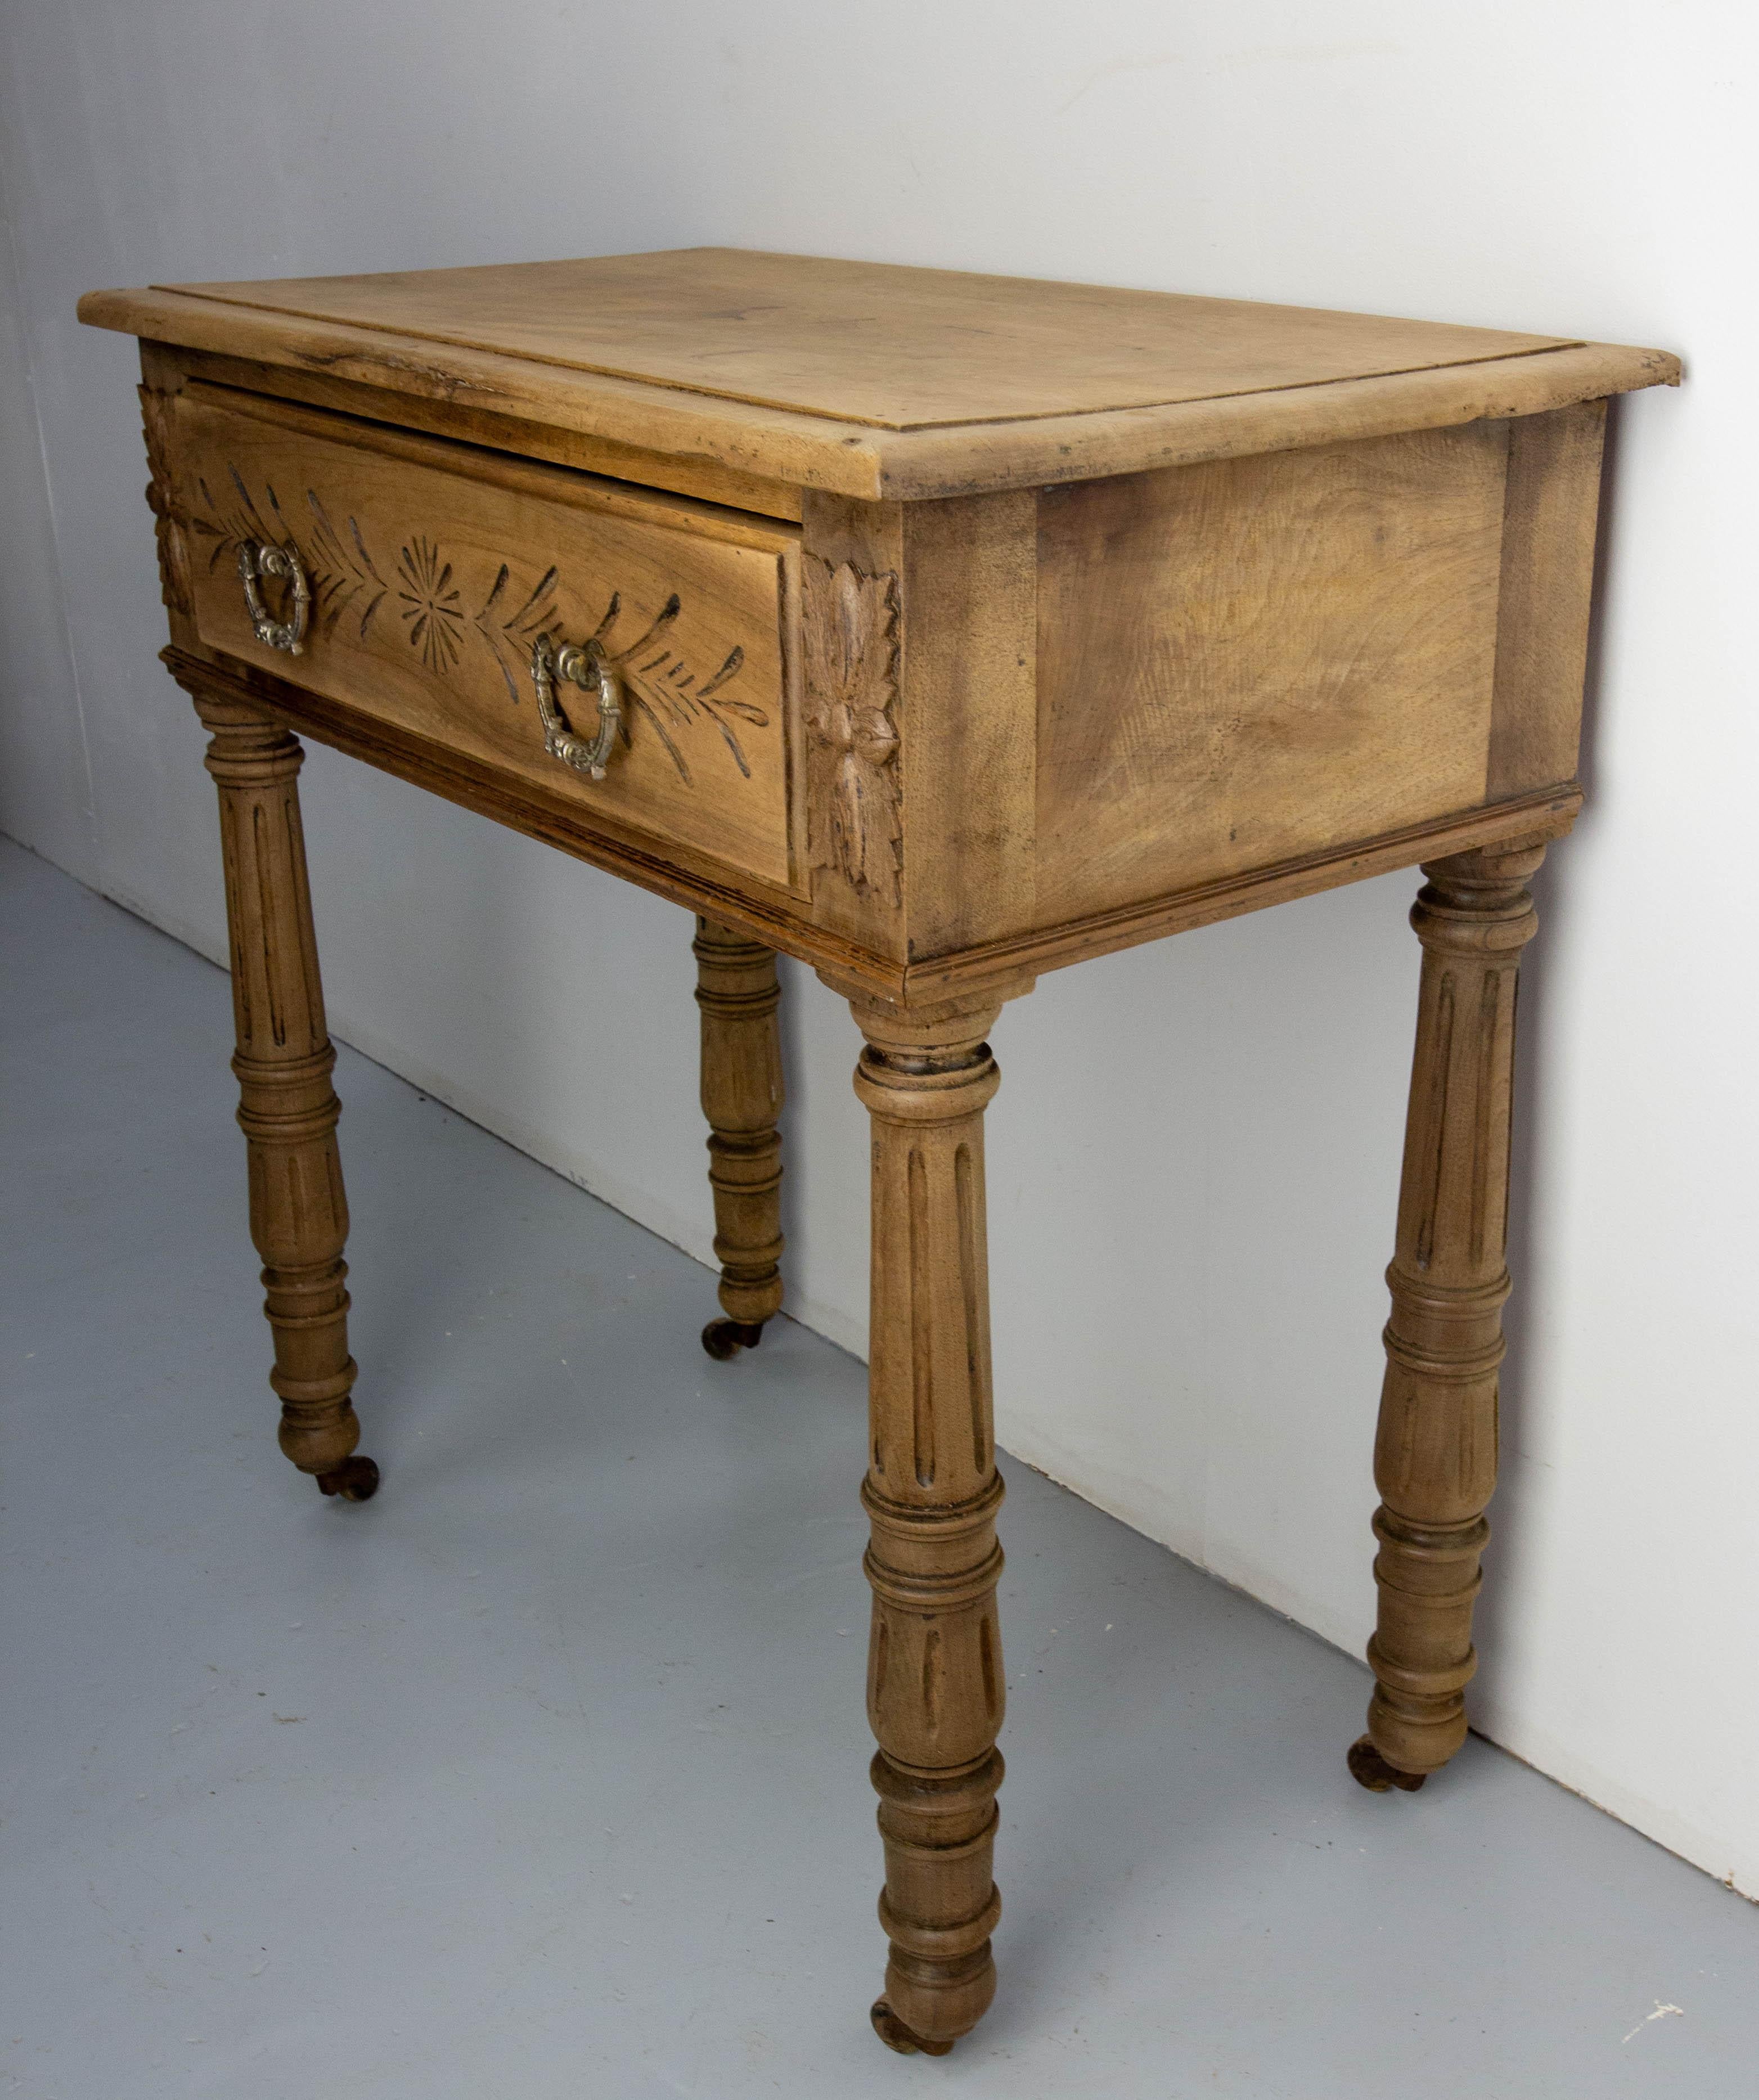 Late 19th Century French 19th Century Writing Table on Wheels Carved Walnut Desk English Style For Sale